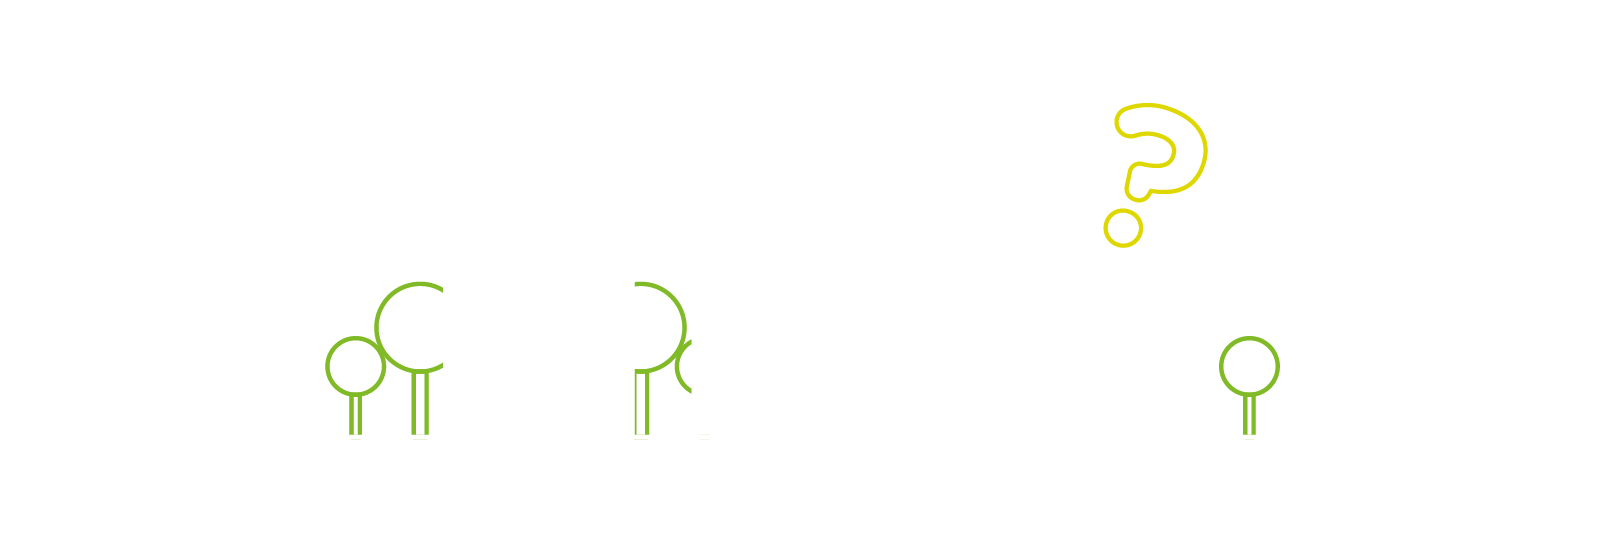 Tariff guide housing network icon